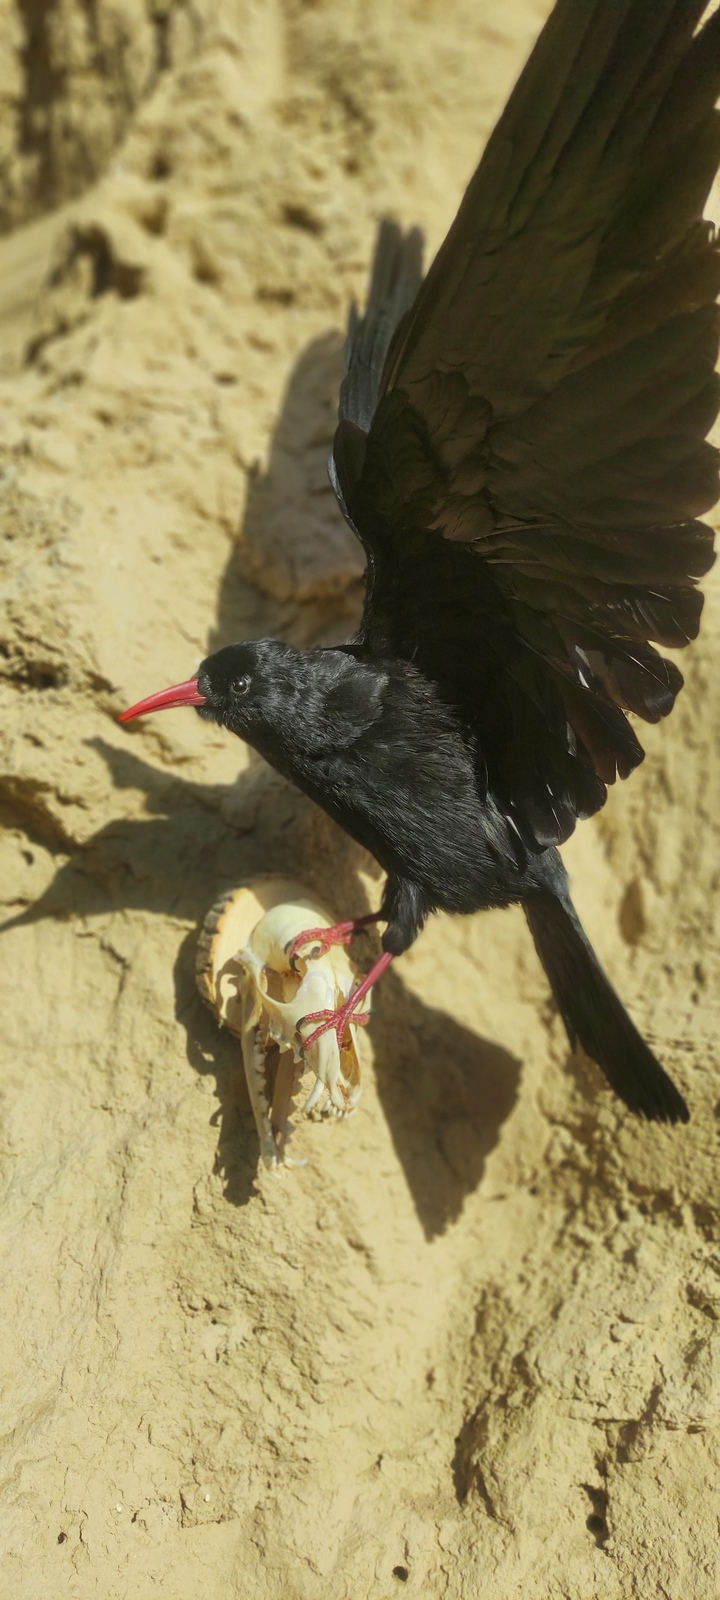 RED BILLED CHOUGH ON A SCULL TAXIDERMY - $238.00